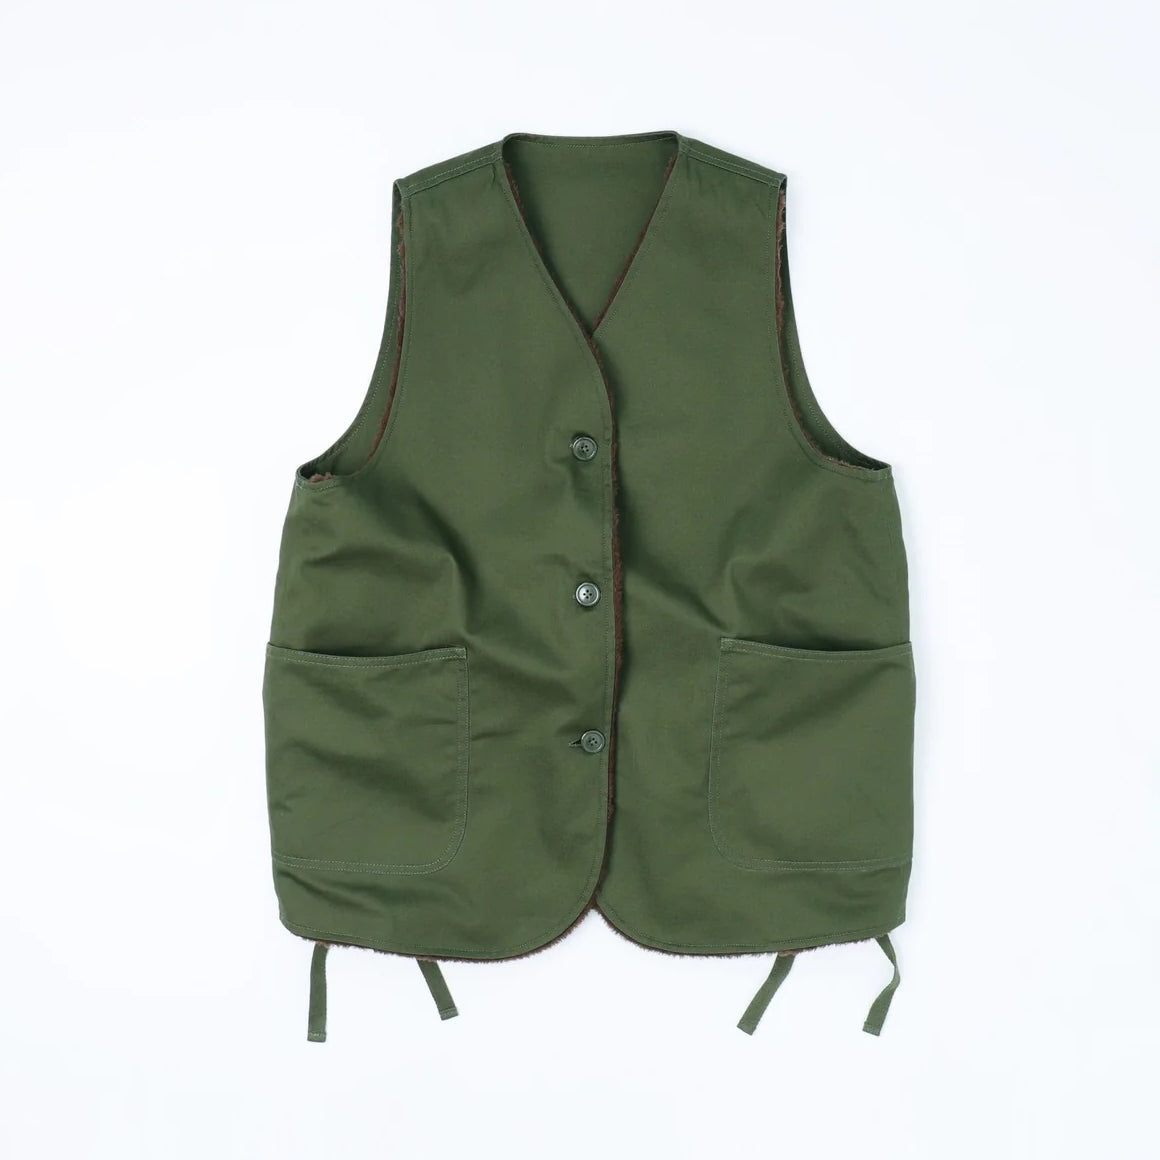 No:#611 | Name:FW23-REVERSIBLE G1 VEST | Color:Green | Size:M/L【WORKWARE】【入荷予定アイテム・入荷連絡可能】